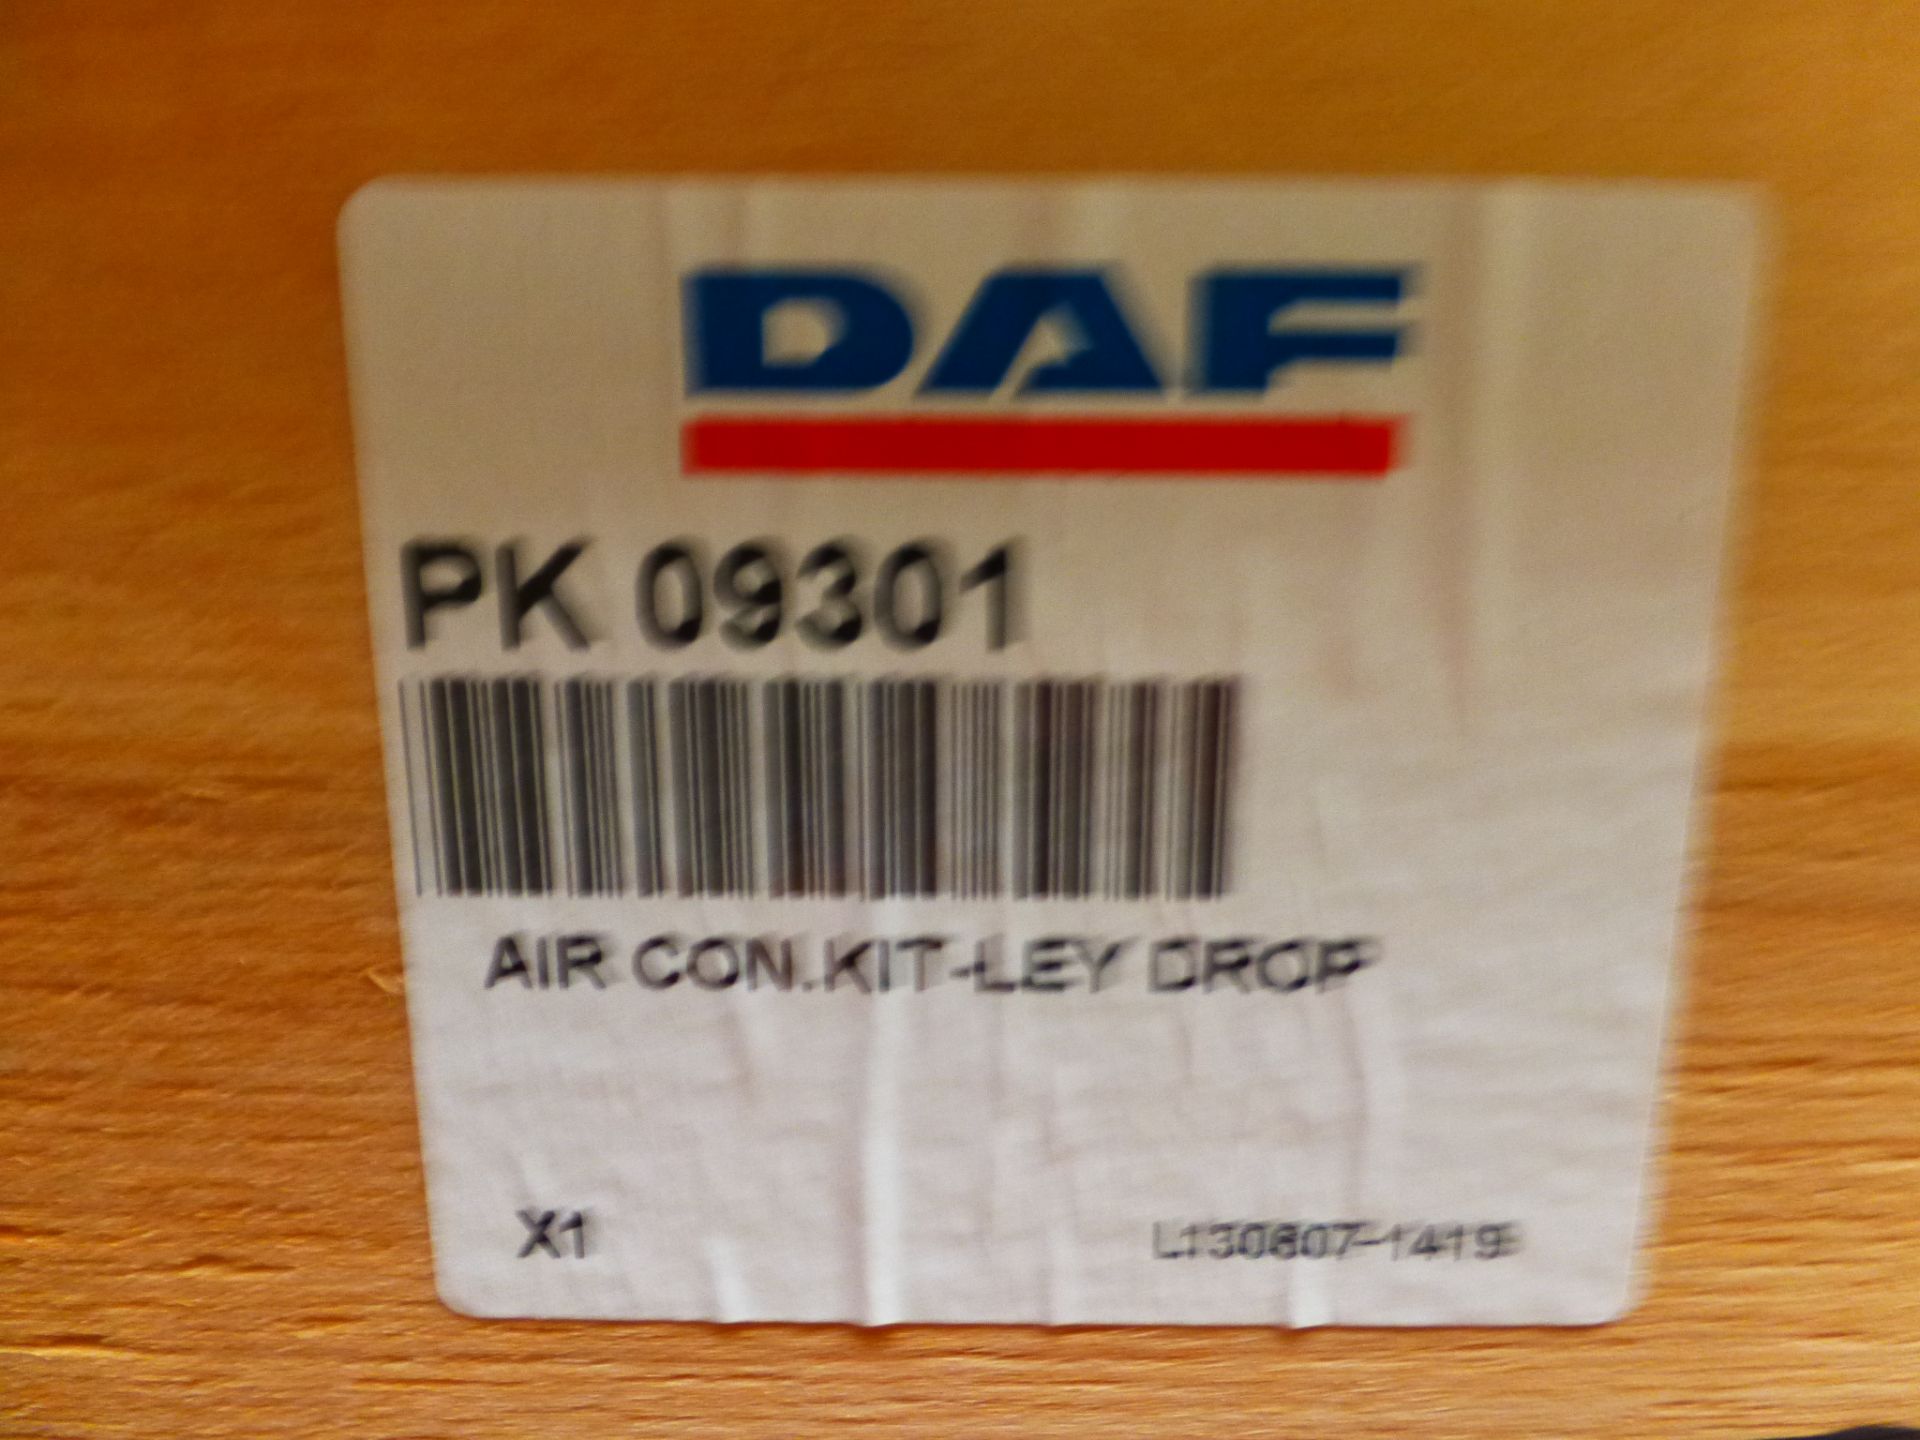 DAF Drops Air Conditioning Kit - Image 7 of 8